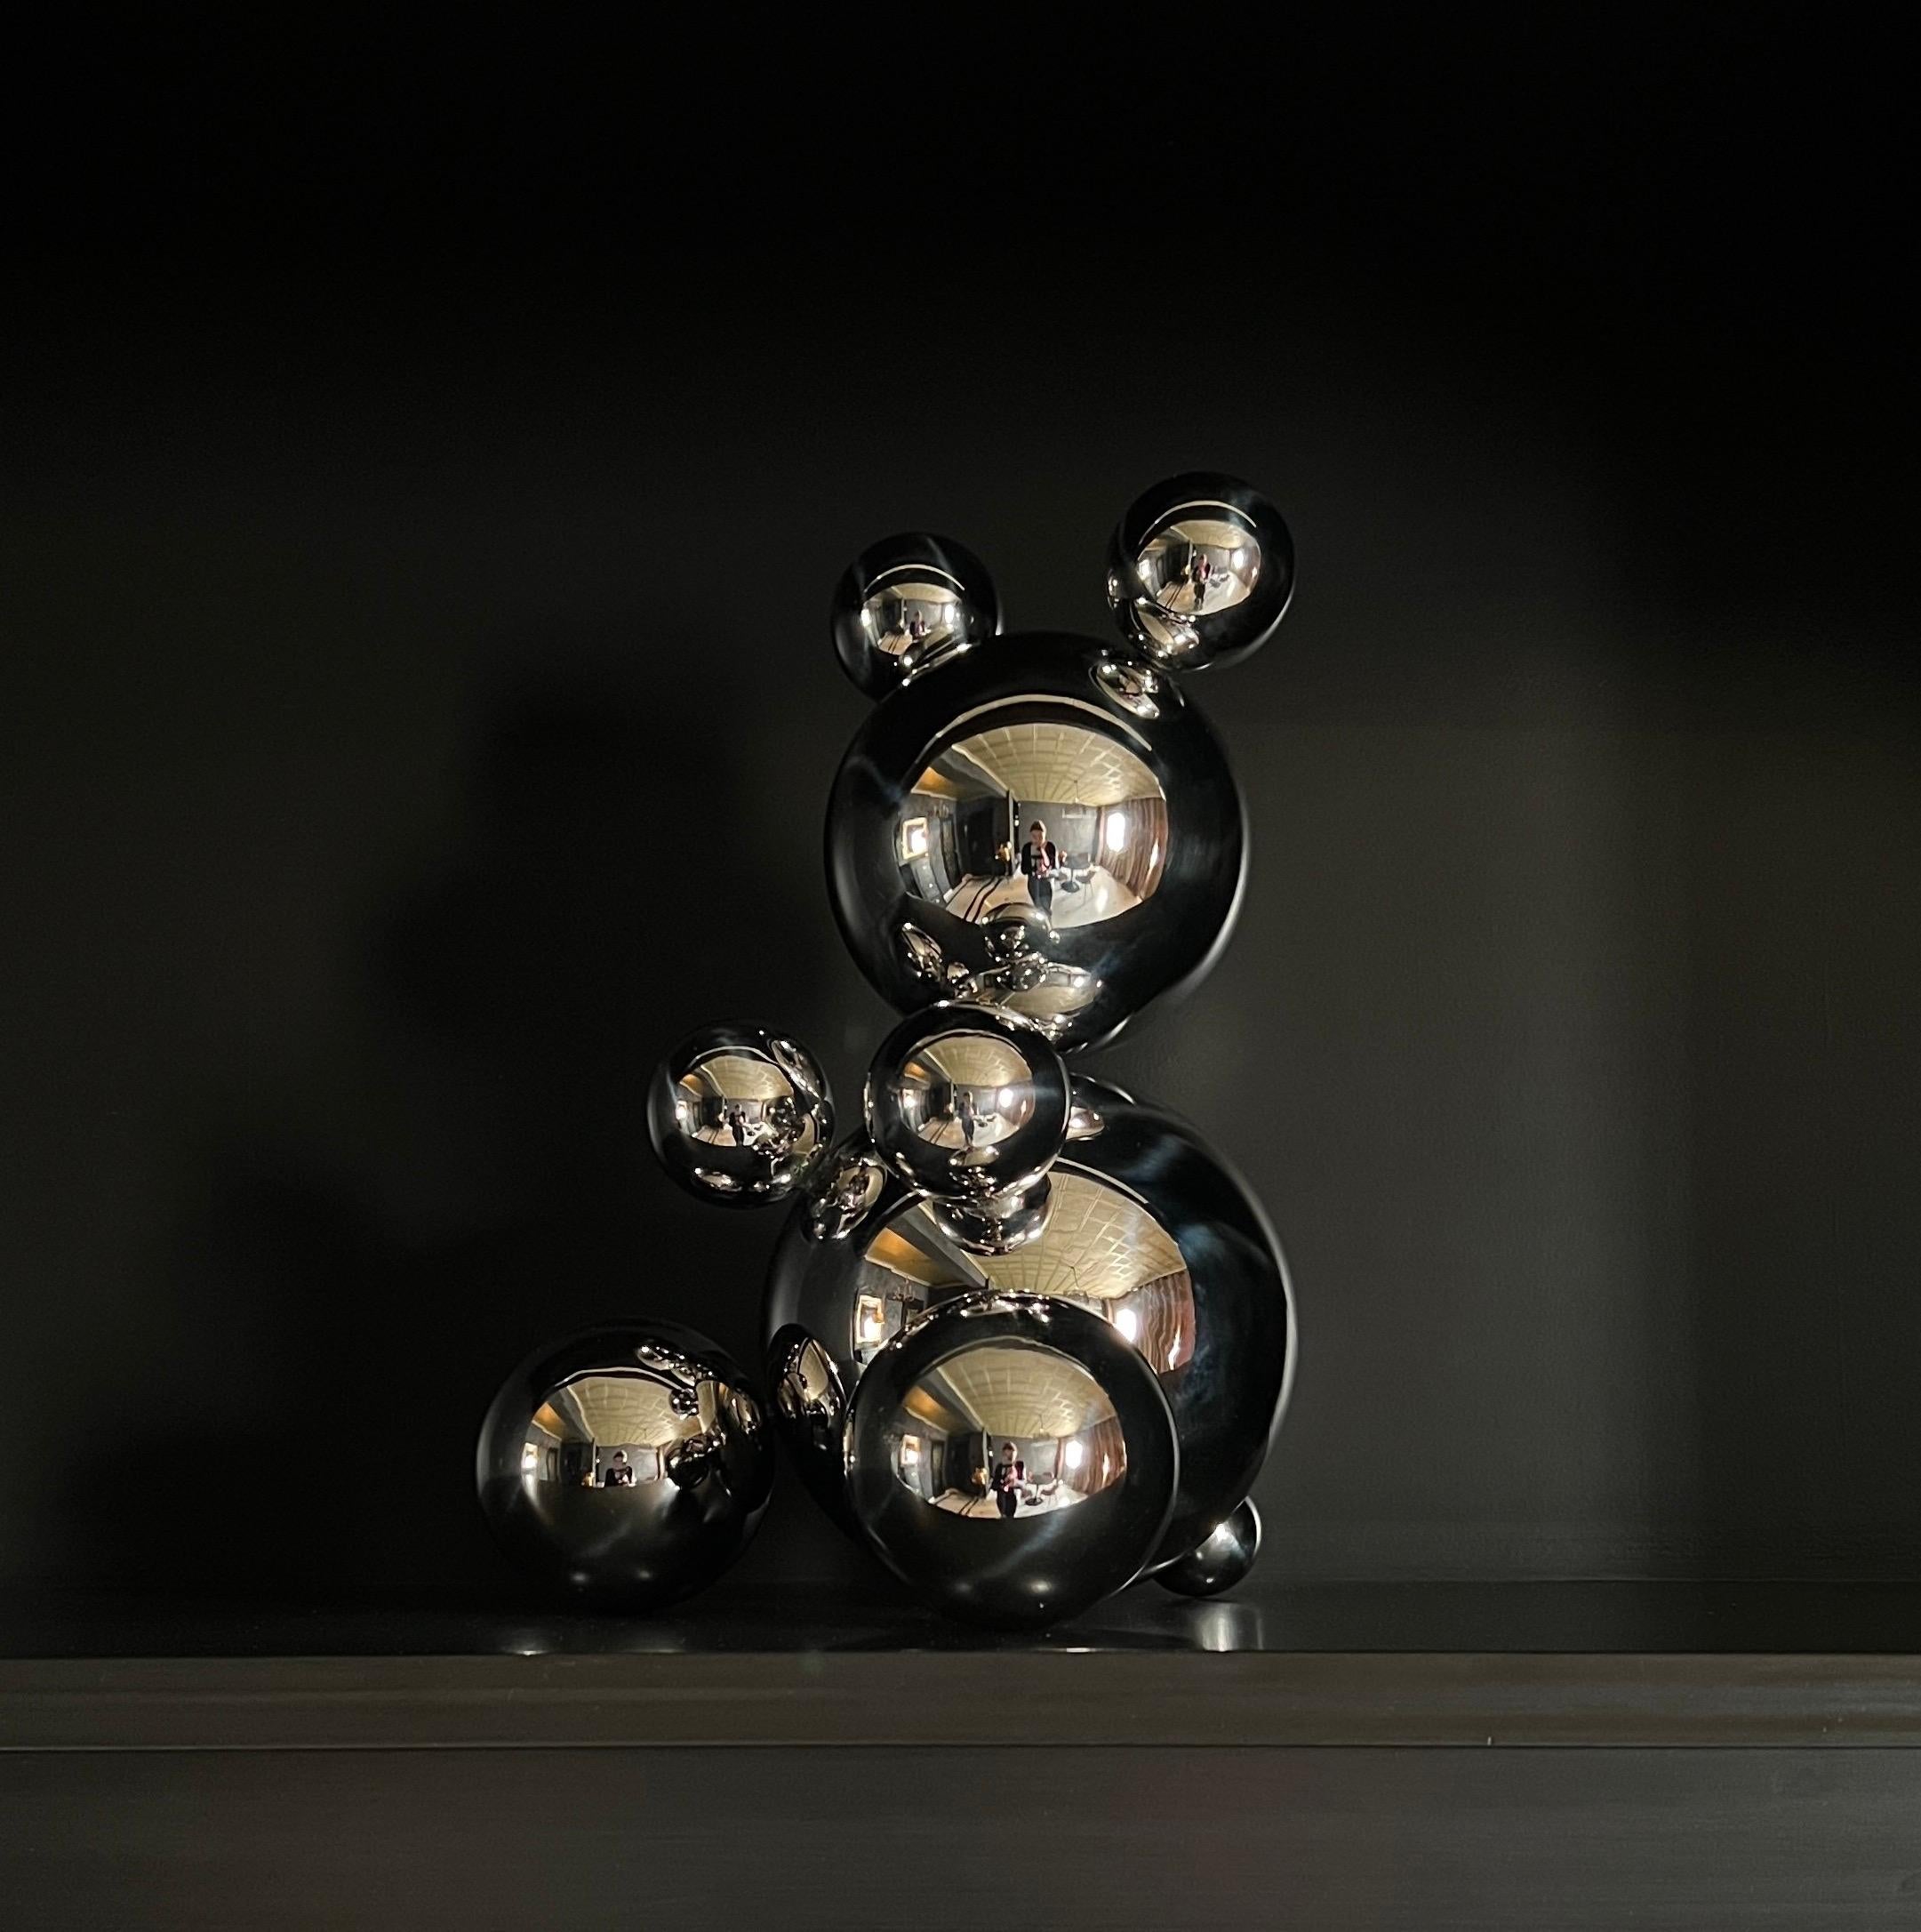 Middle Stainless Steel Bear 'Brian' Sculpture Minimalistic Animal 5